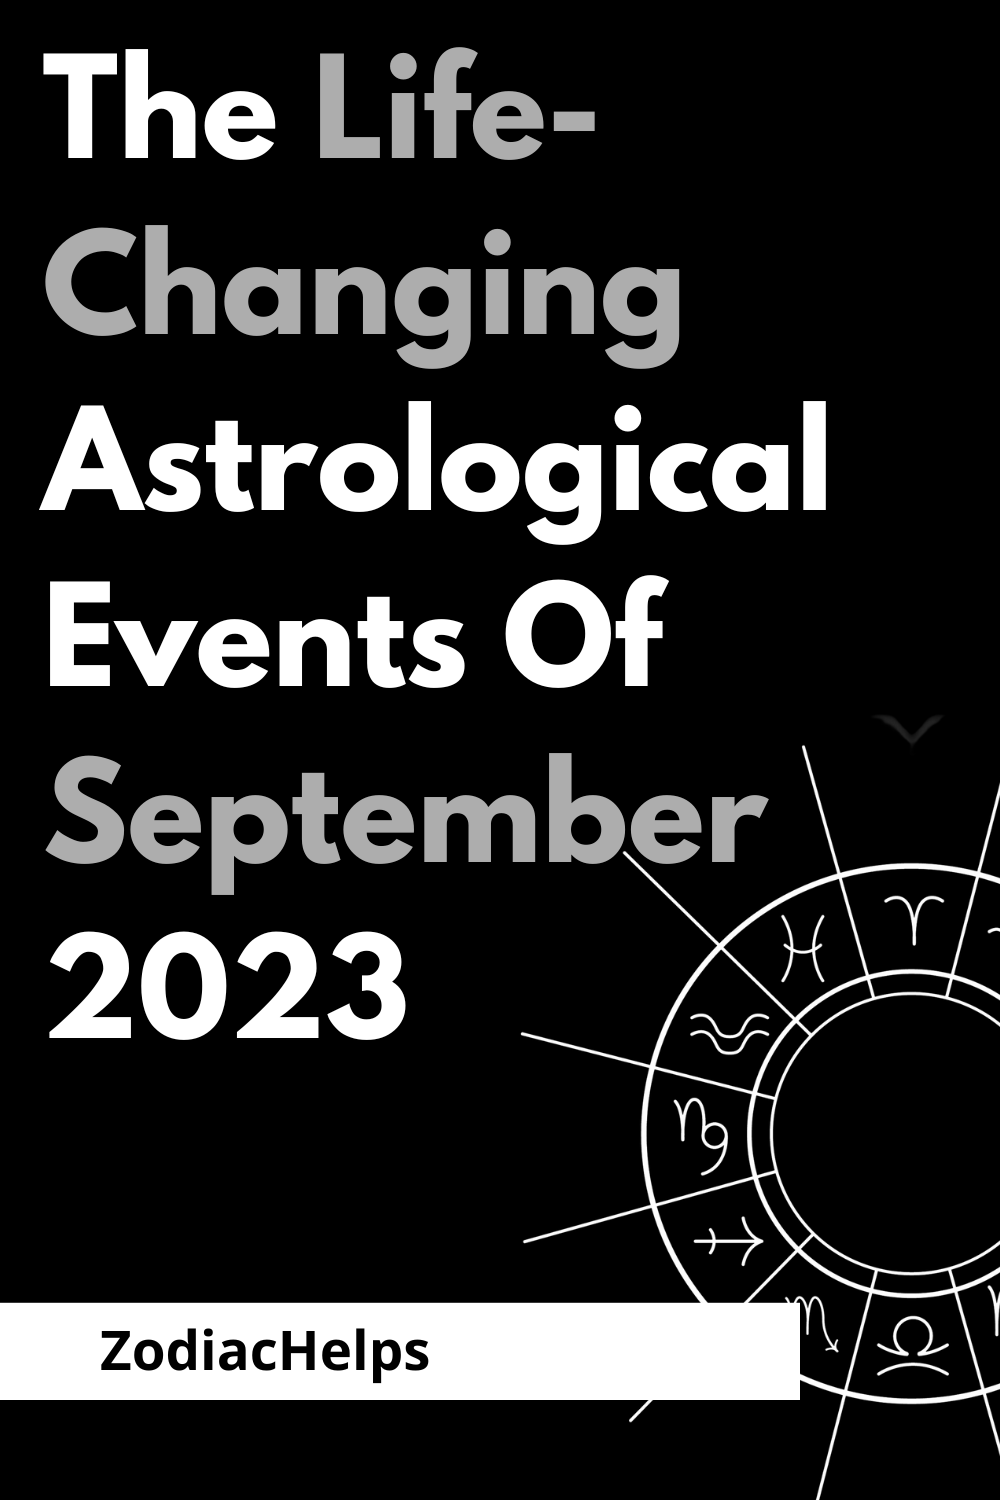 The Life-Changing Astrological Events Of September 2023